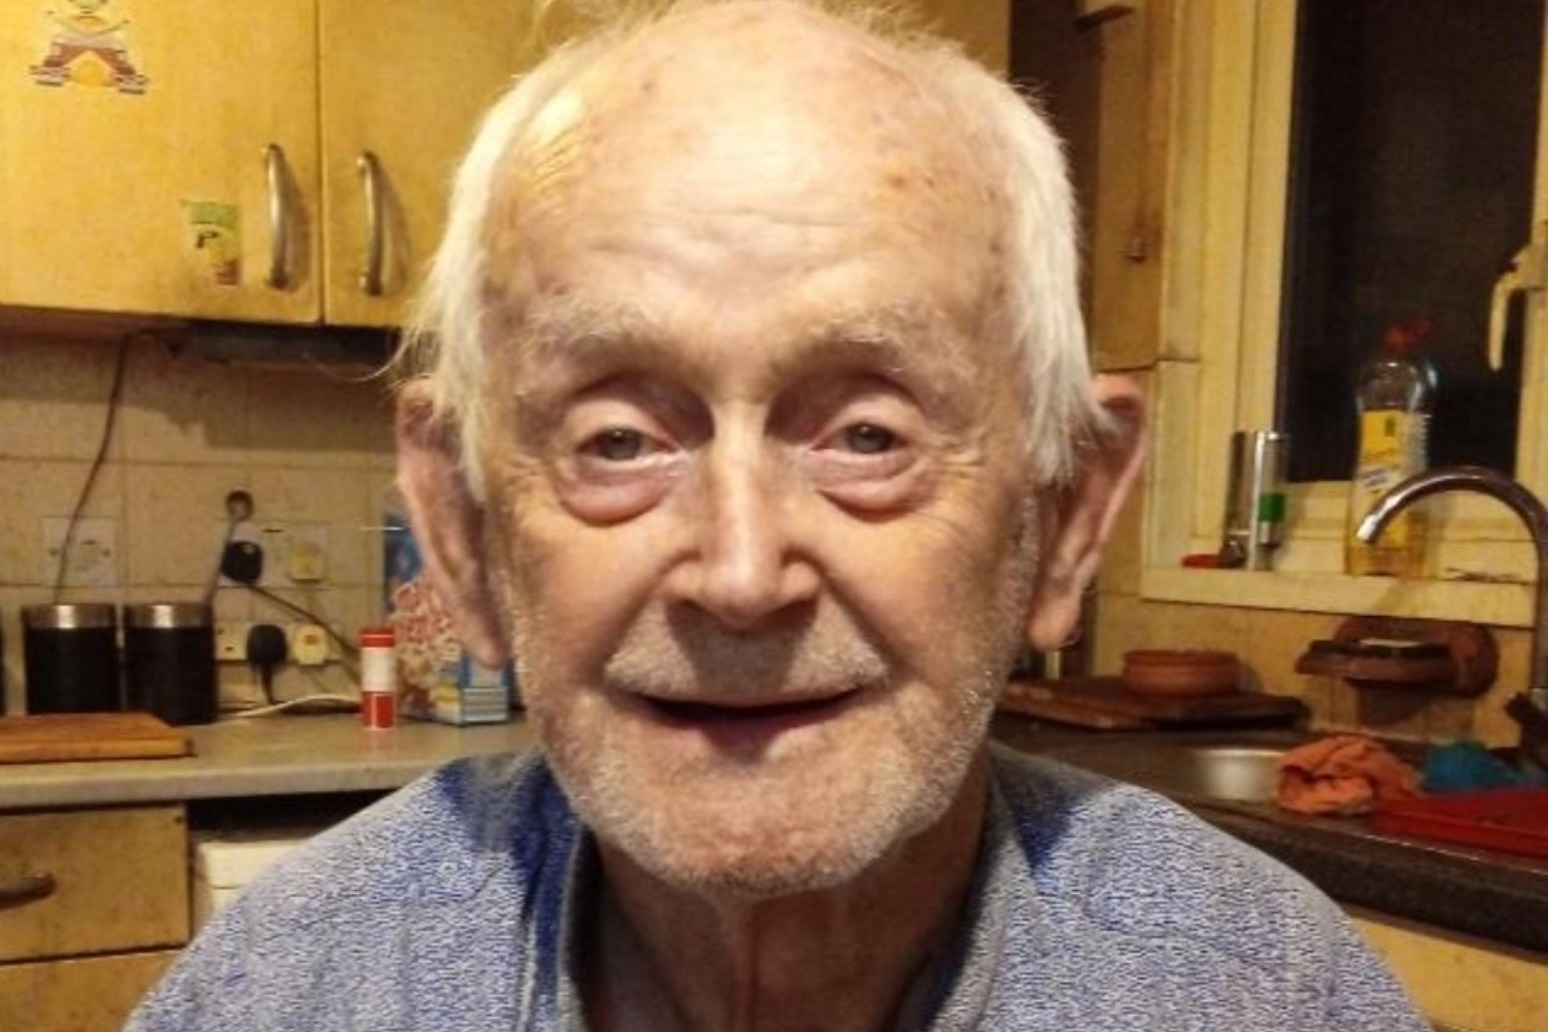 Man, 44, charged with mobility scooter murder of 87-year-old Thomas O’Halloran 